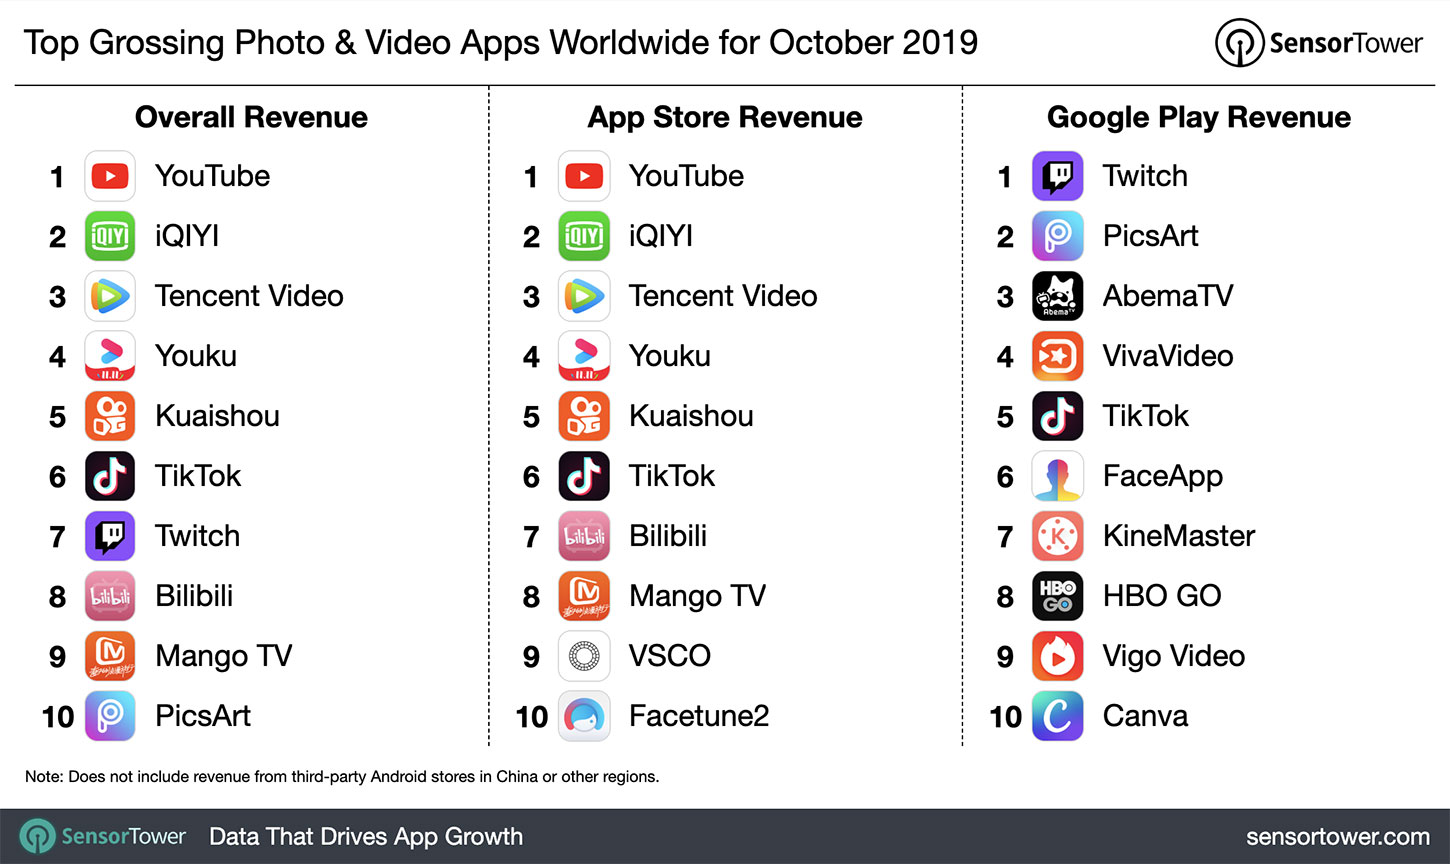 top-grossing-photo-and-video-apps-worldwide-october-2019.jpg